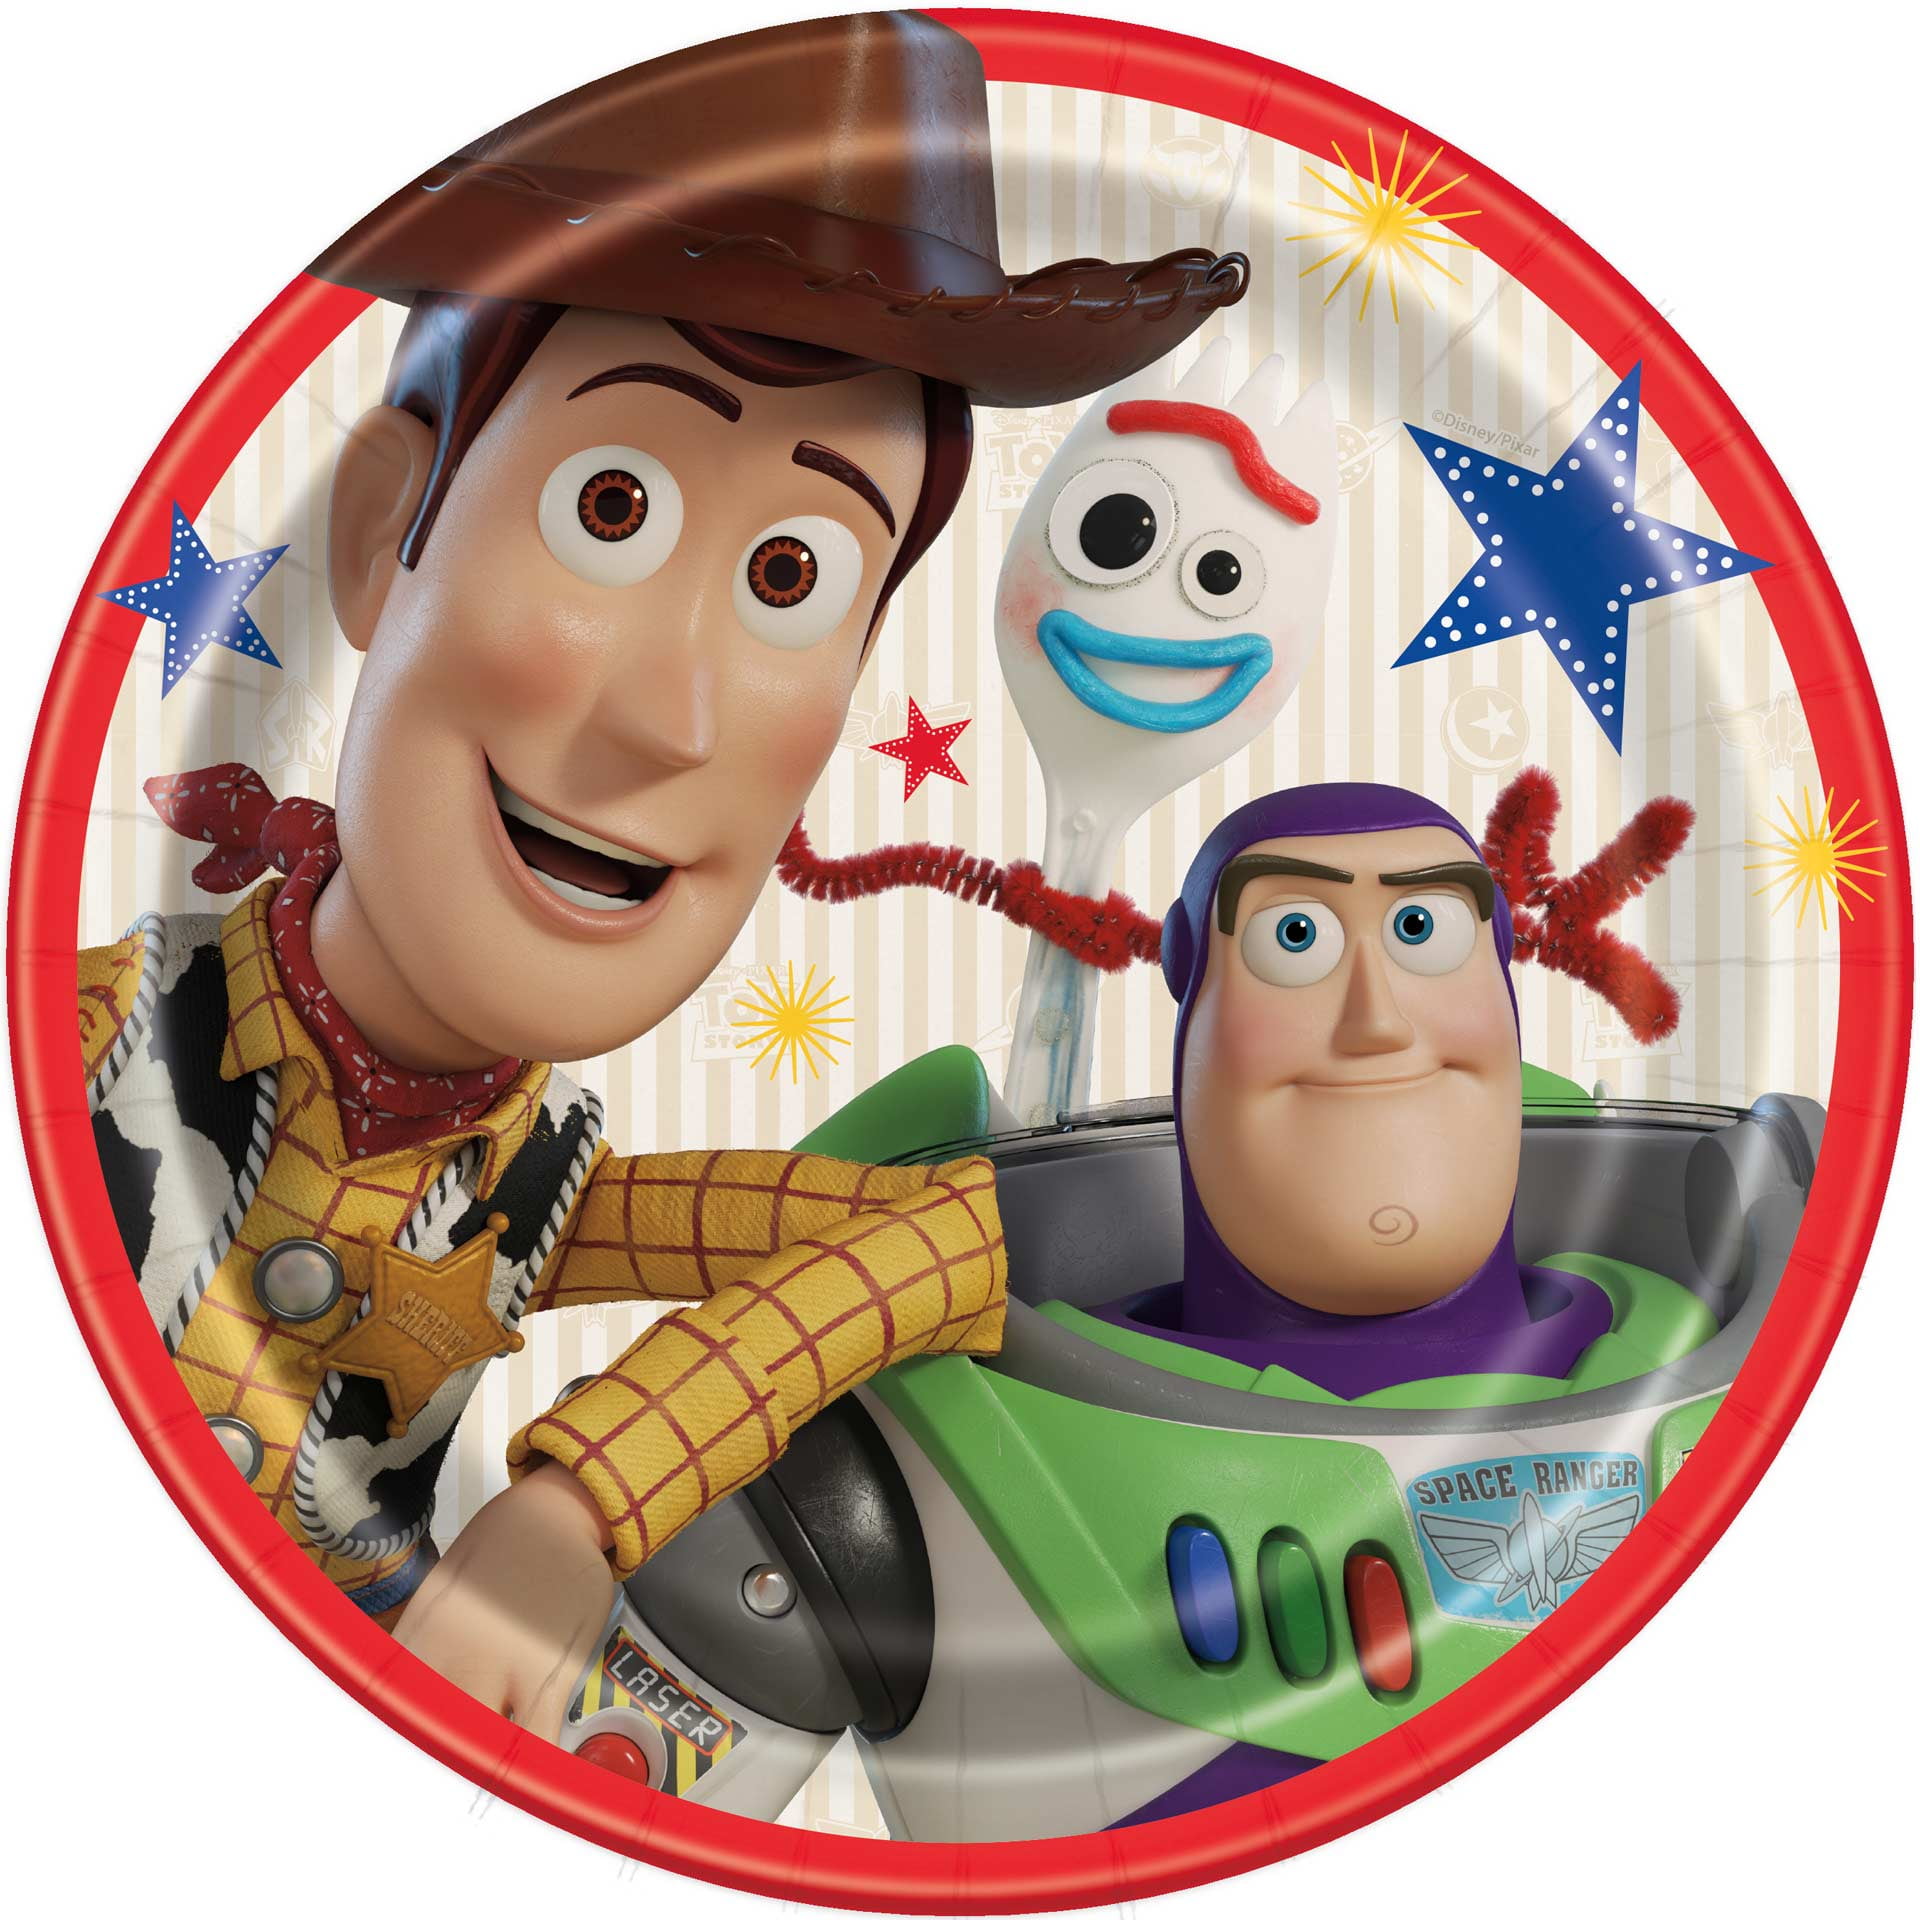 Toystory 4 Toy Story **ROUND** edible cake image frosting sheet topper 